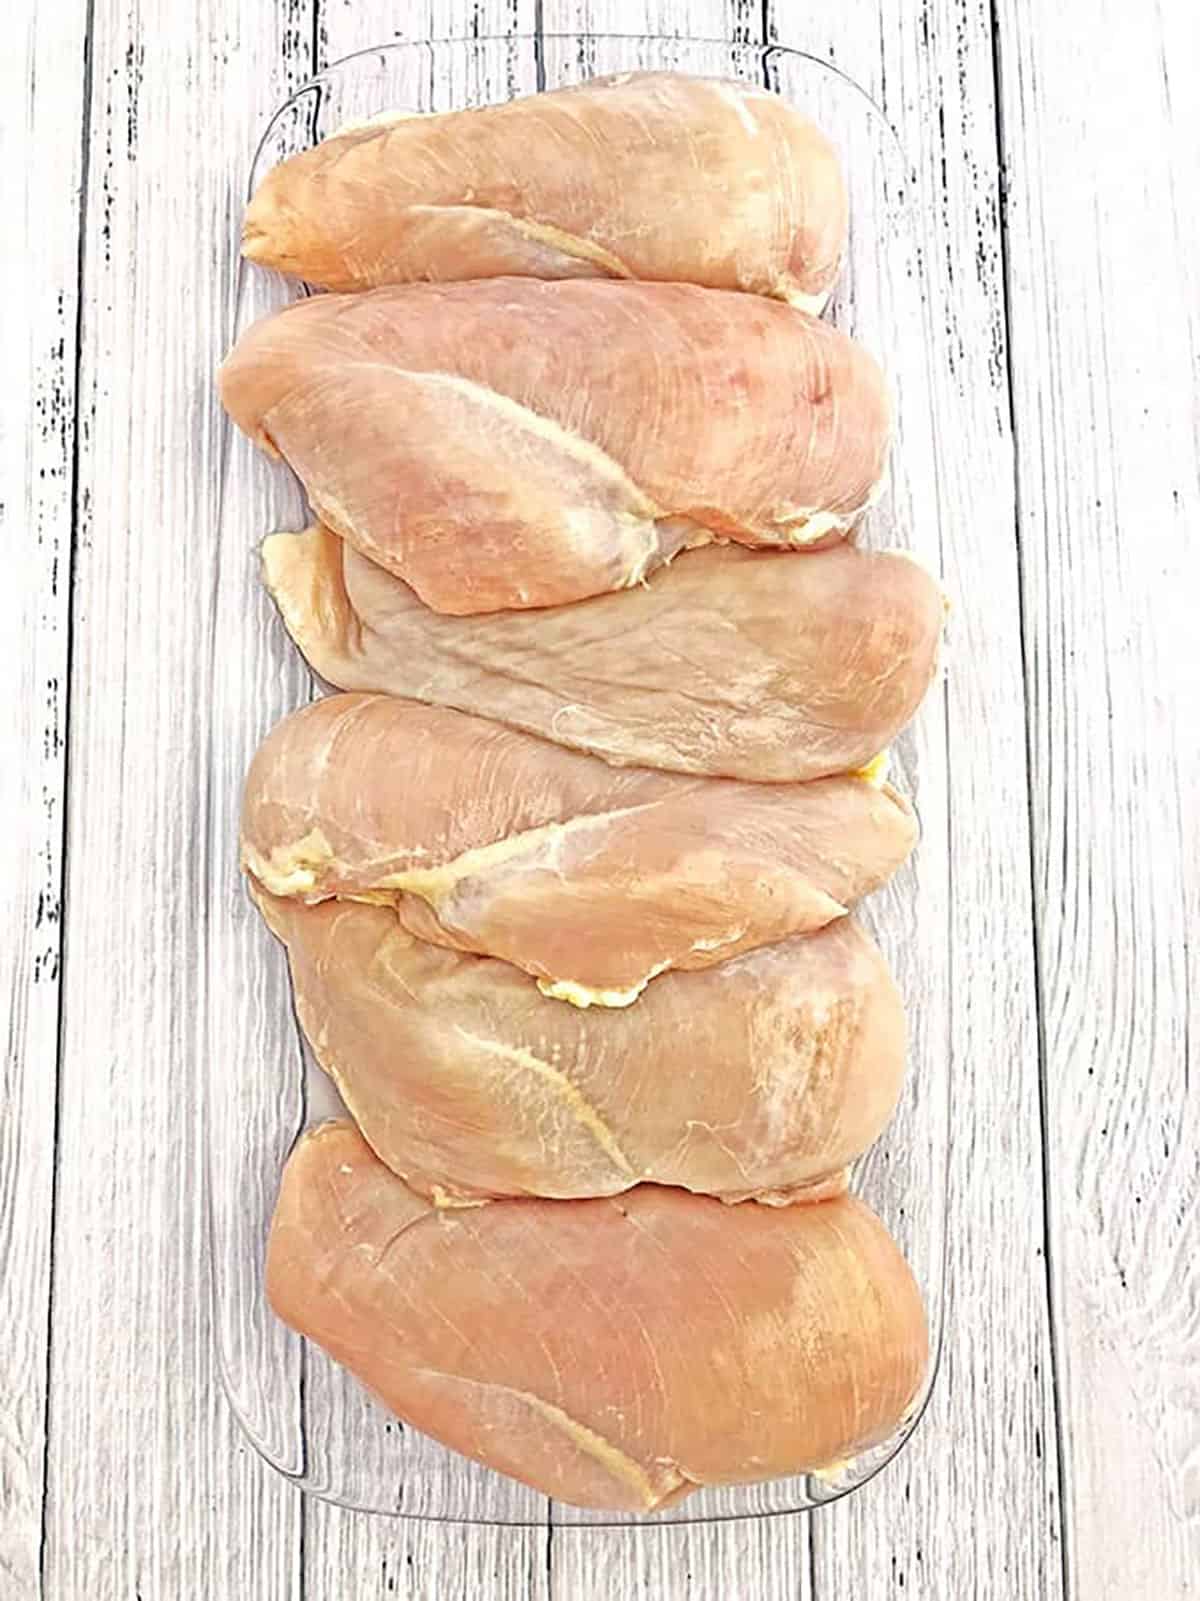 You can also use boneless skinless chicken thighs, just watch for the bones. 